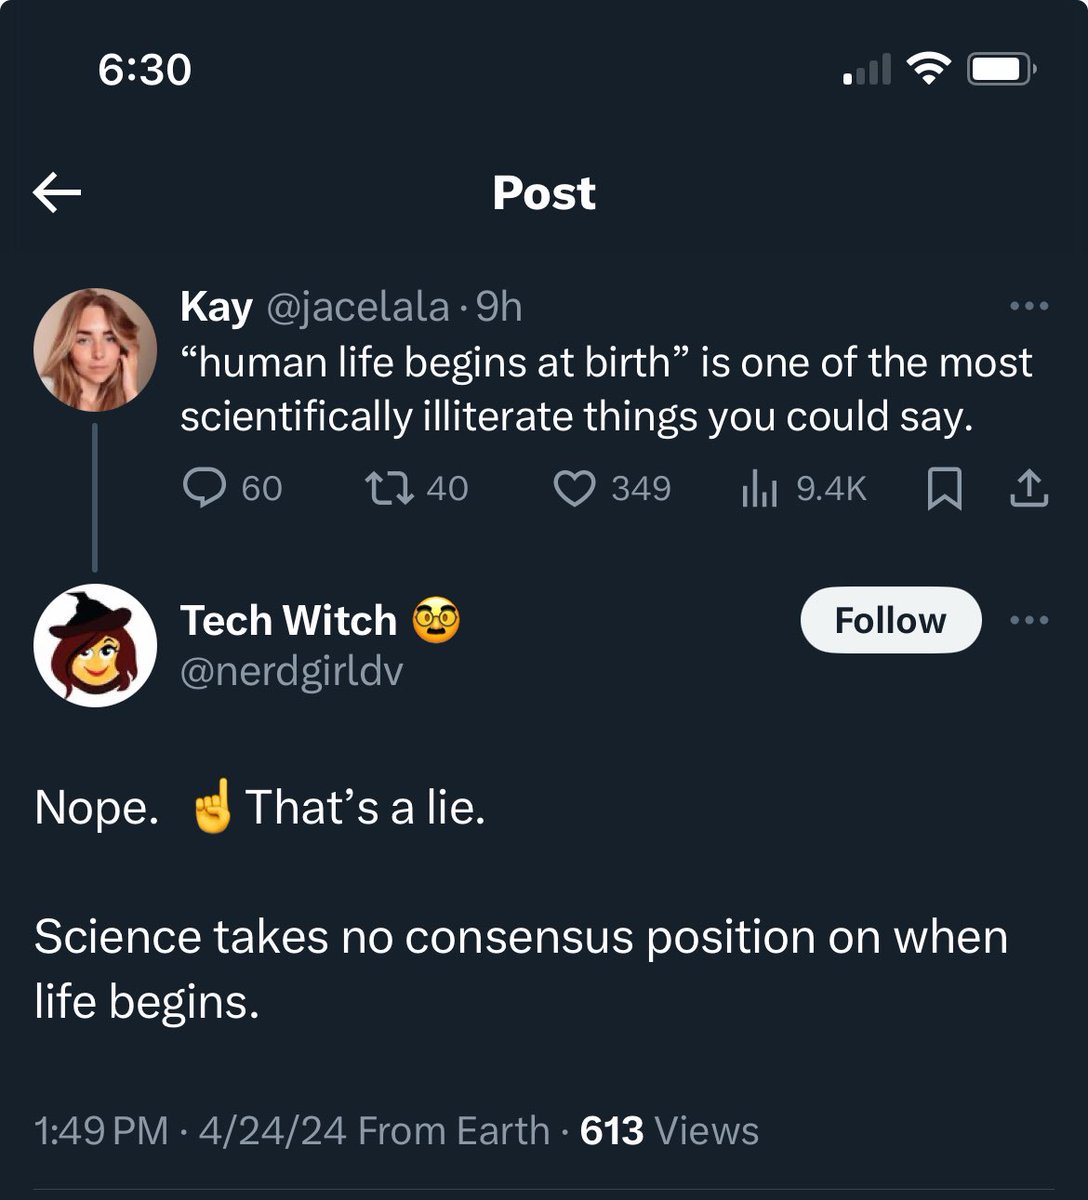 Right. So science isn't a consensus, that's number one. This isn't climate science, also known as partisan politics. Number two since science relies on verifiable data and not widespread agreement, you're actually incorrect as per The entire field of embryology.